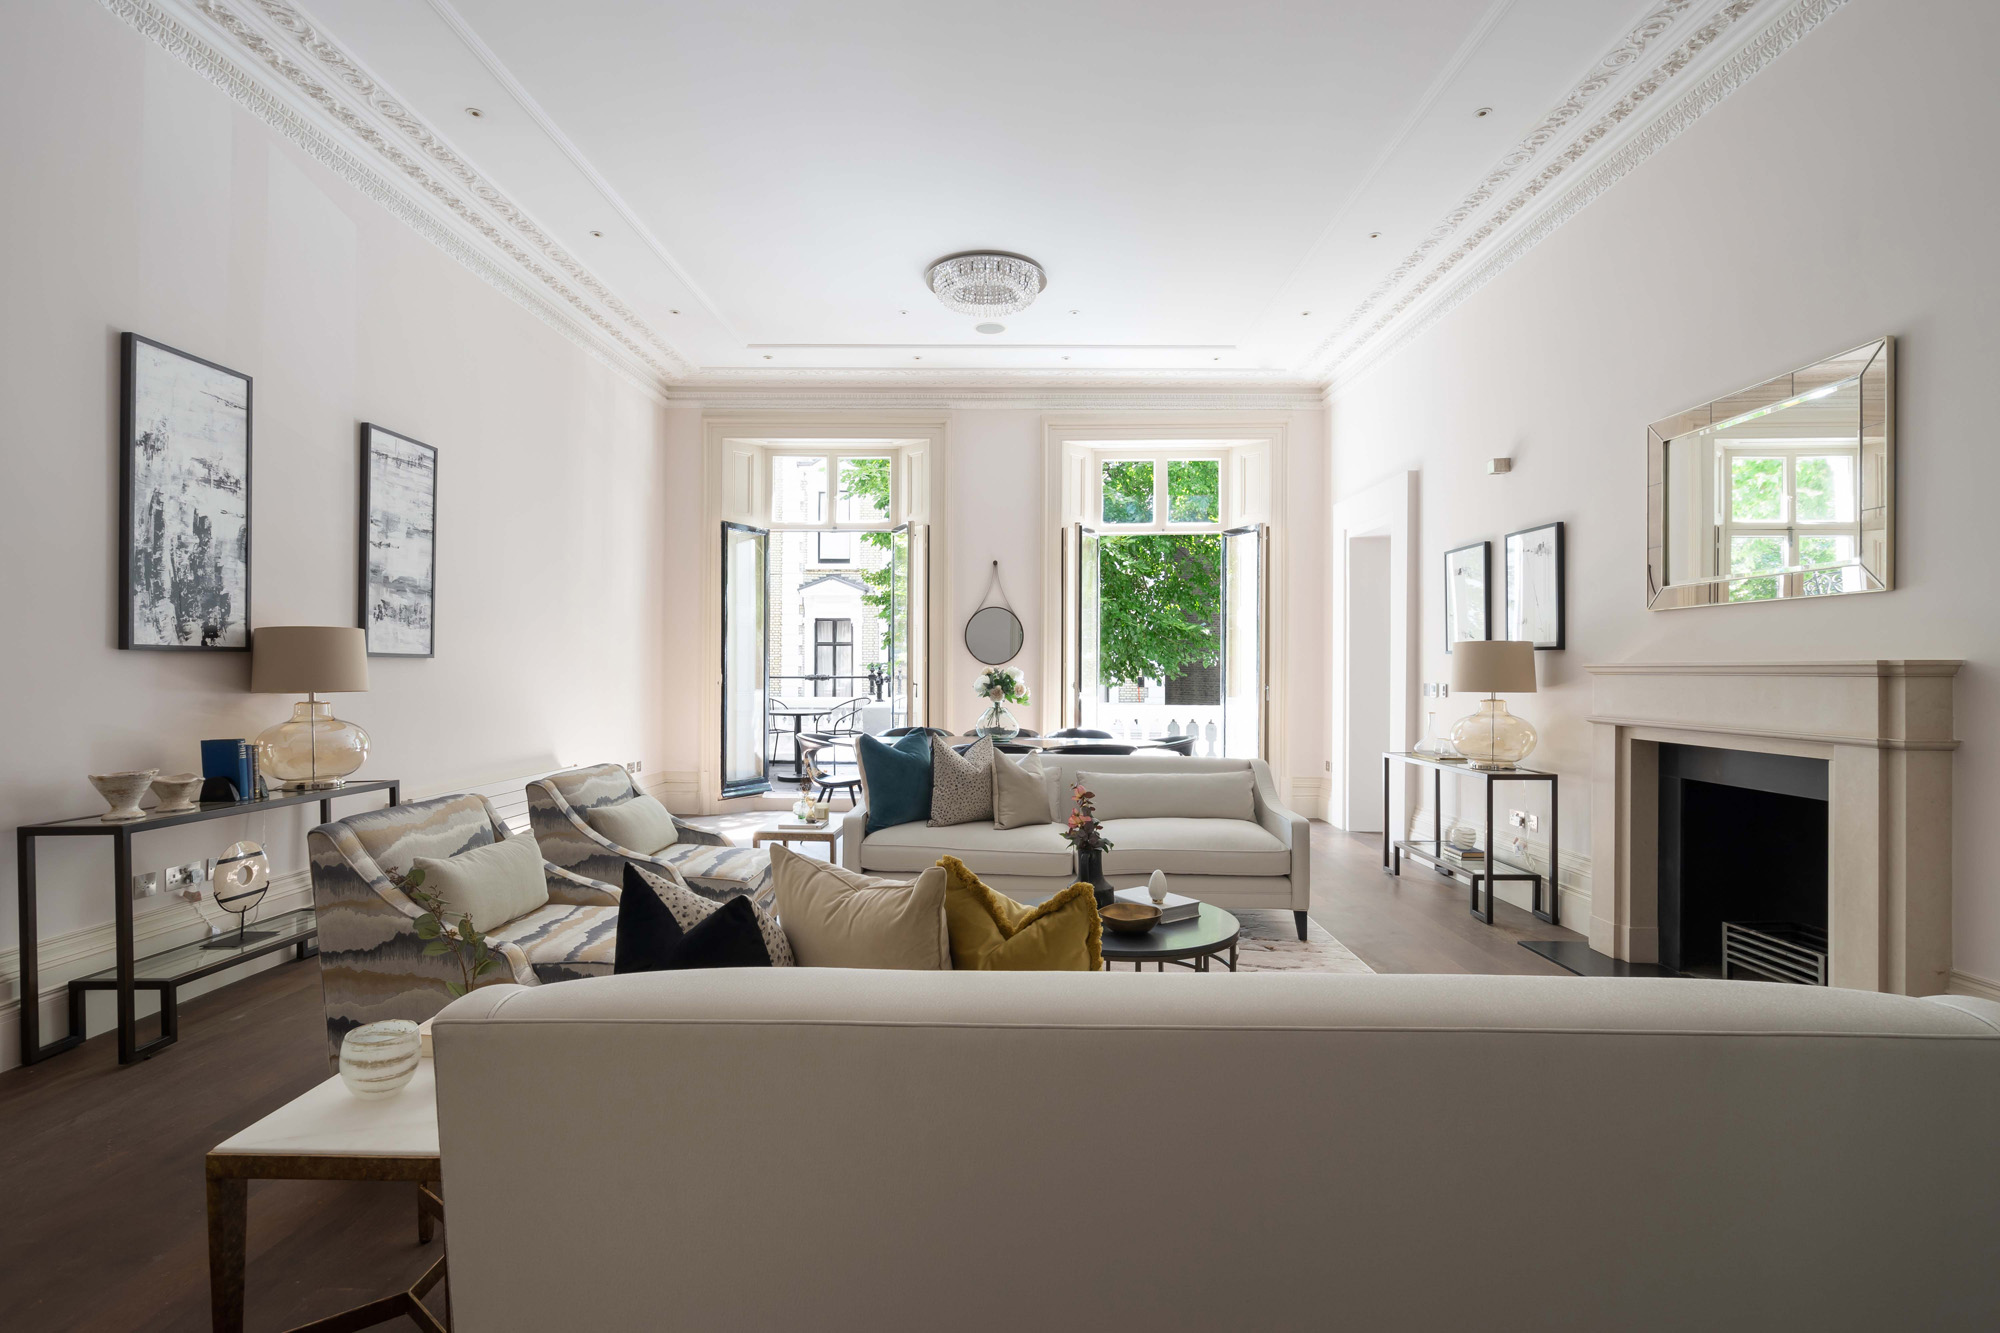 For Sale: Linden Gardens Notting Hill W11 reception room with luxury interior design